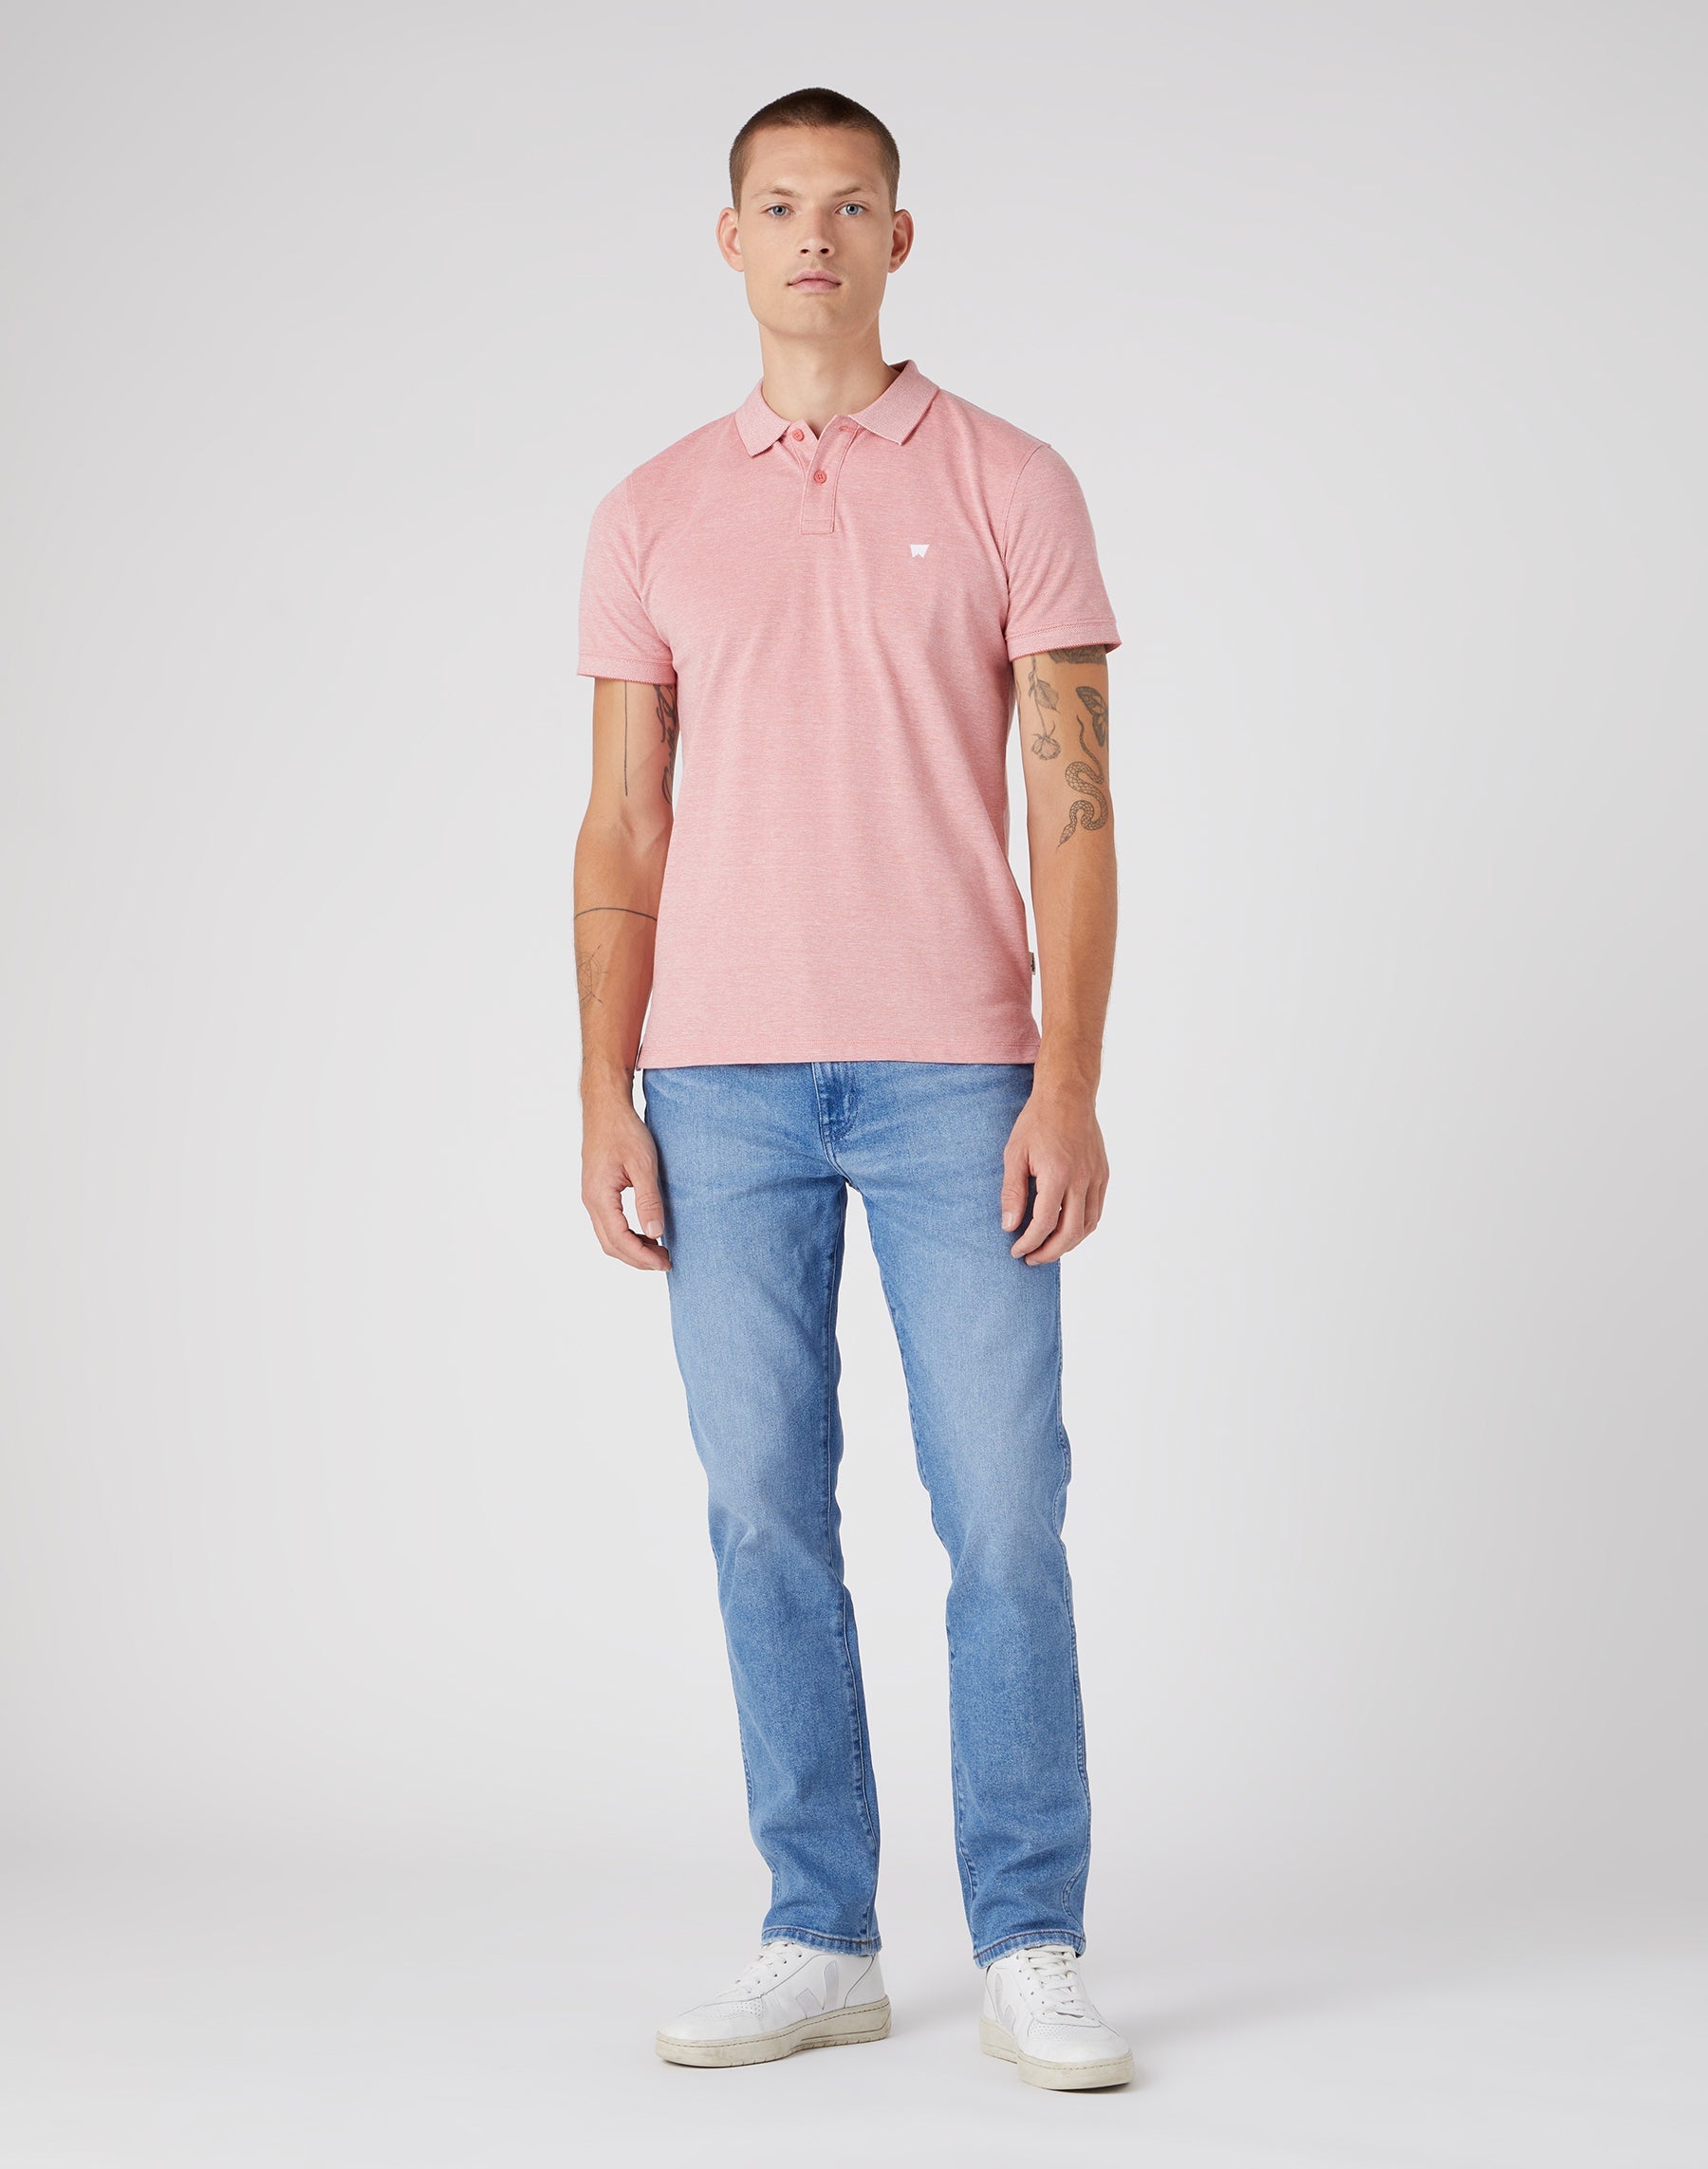 Refined Polo Shirt in Faded Rose Polos Wrangler   